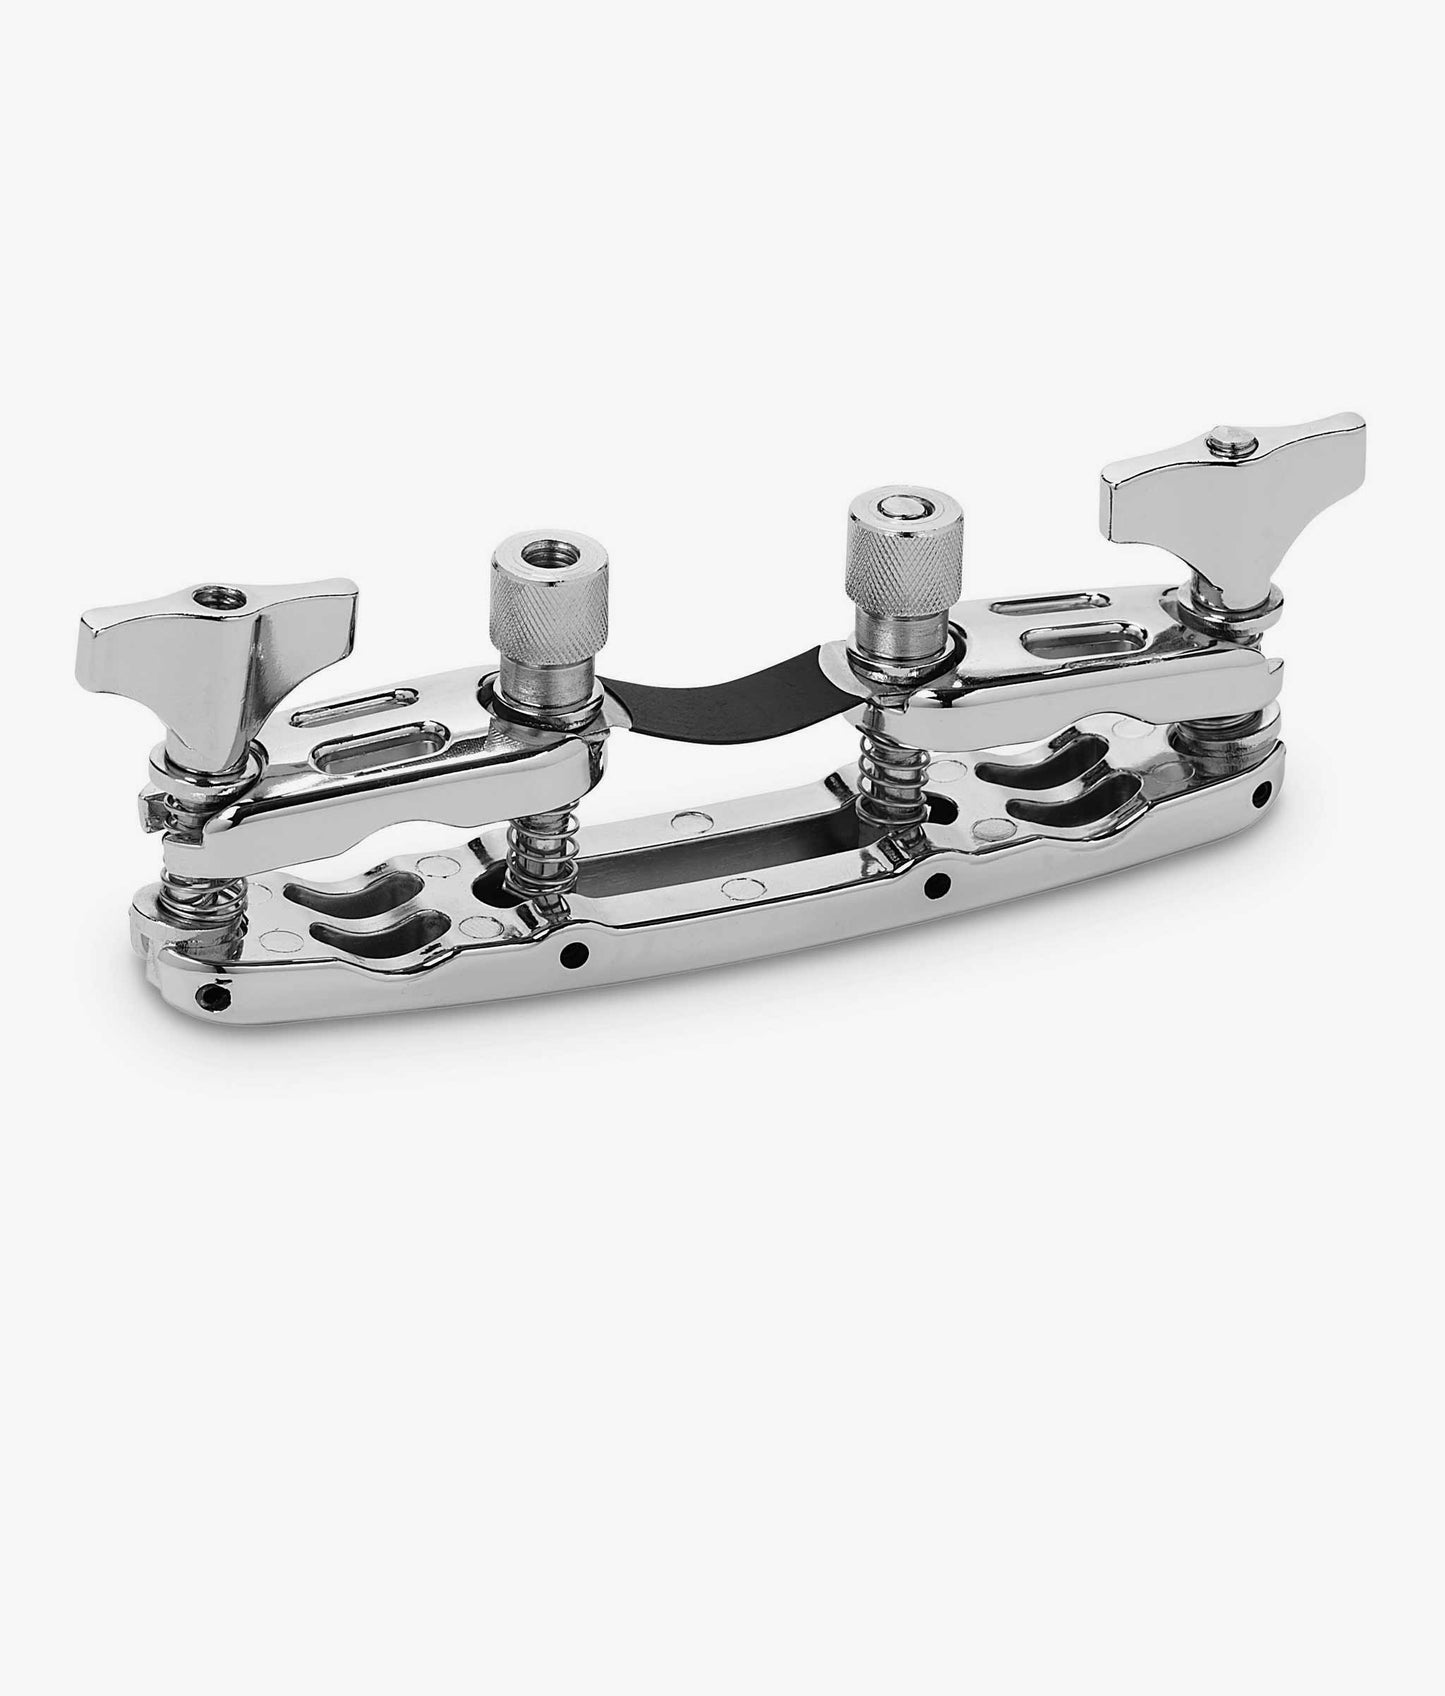 Gibraltar SC-FMC 2-Way Quick Release Multi Clamp for Drum / Cymbal Stands & Holders - 2 Way Multi Clamp | Gibraltar